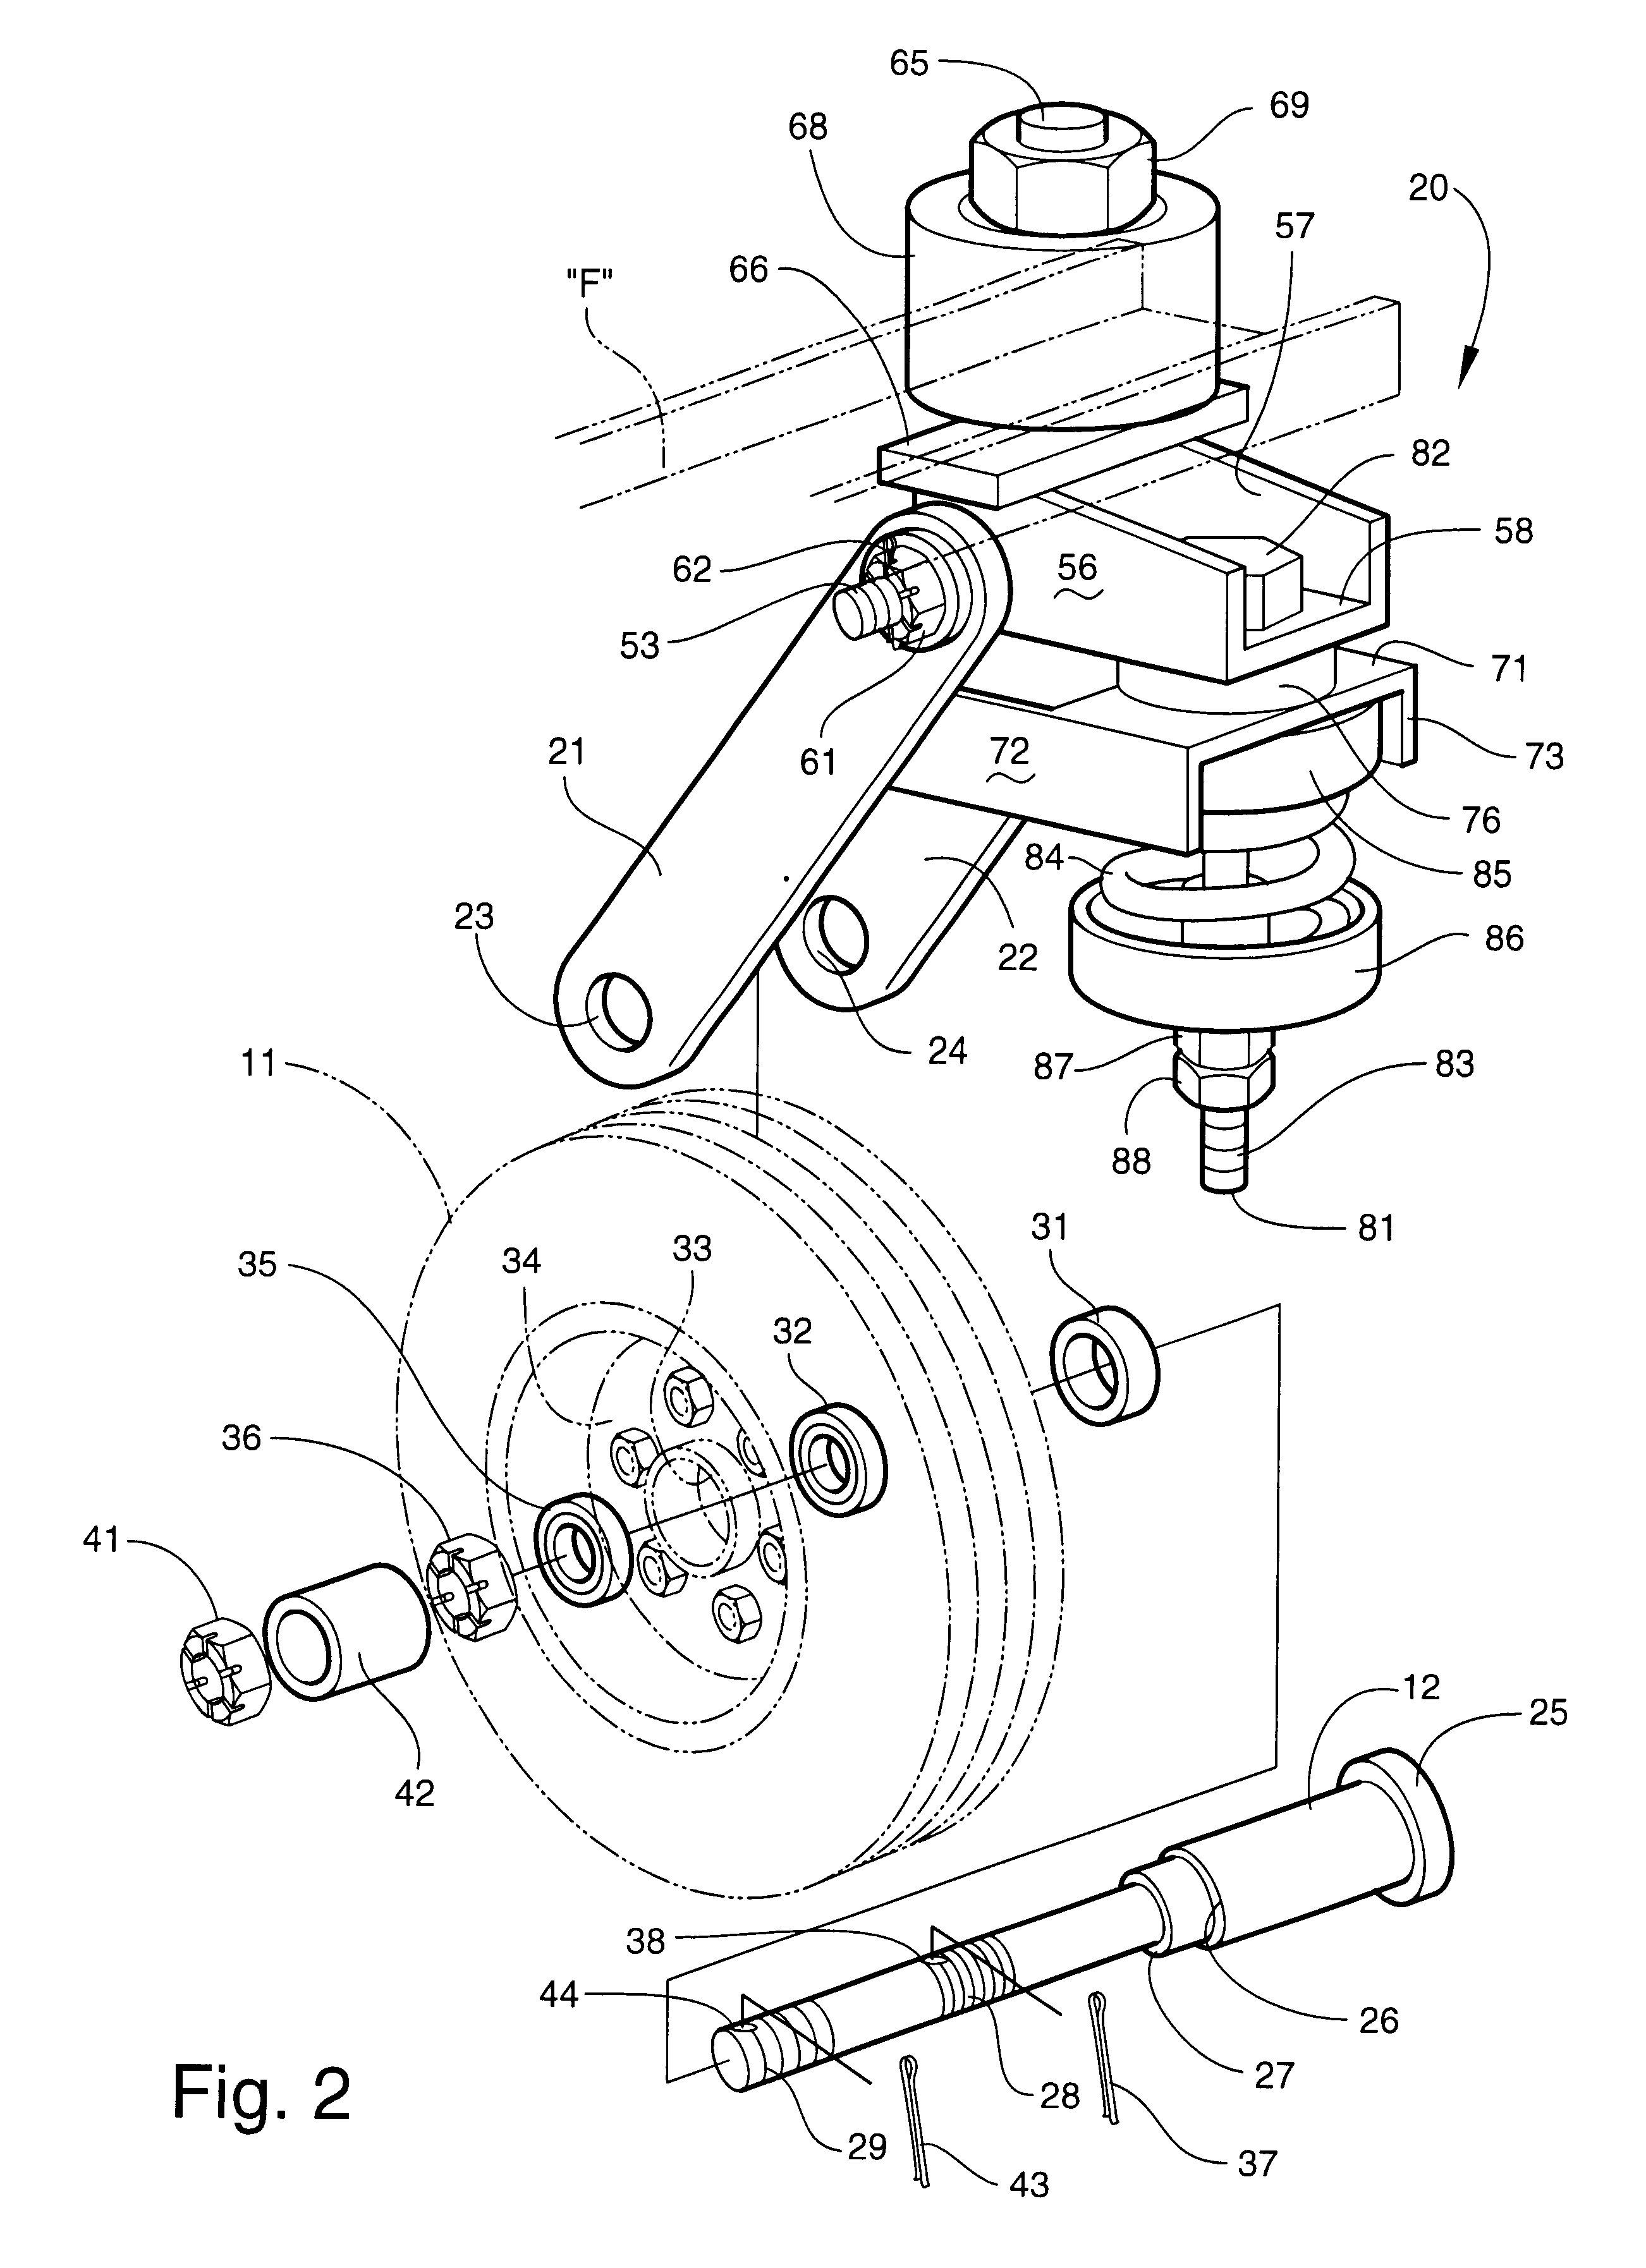 Swivel wheel assembly with adjustable shock absorption